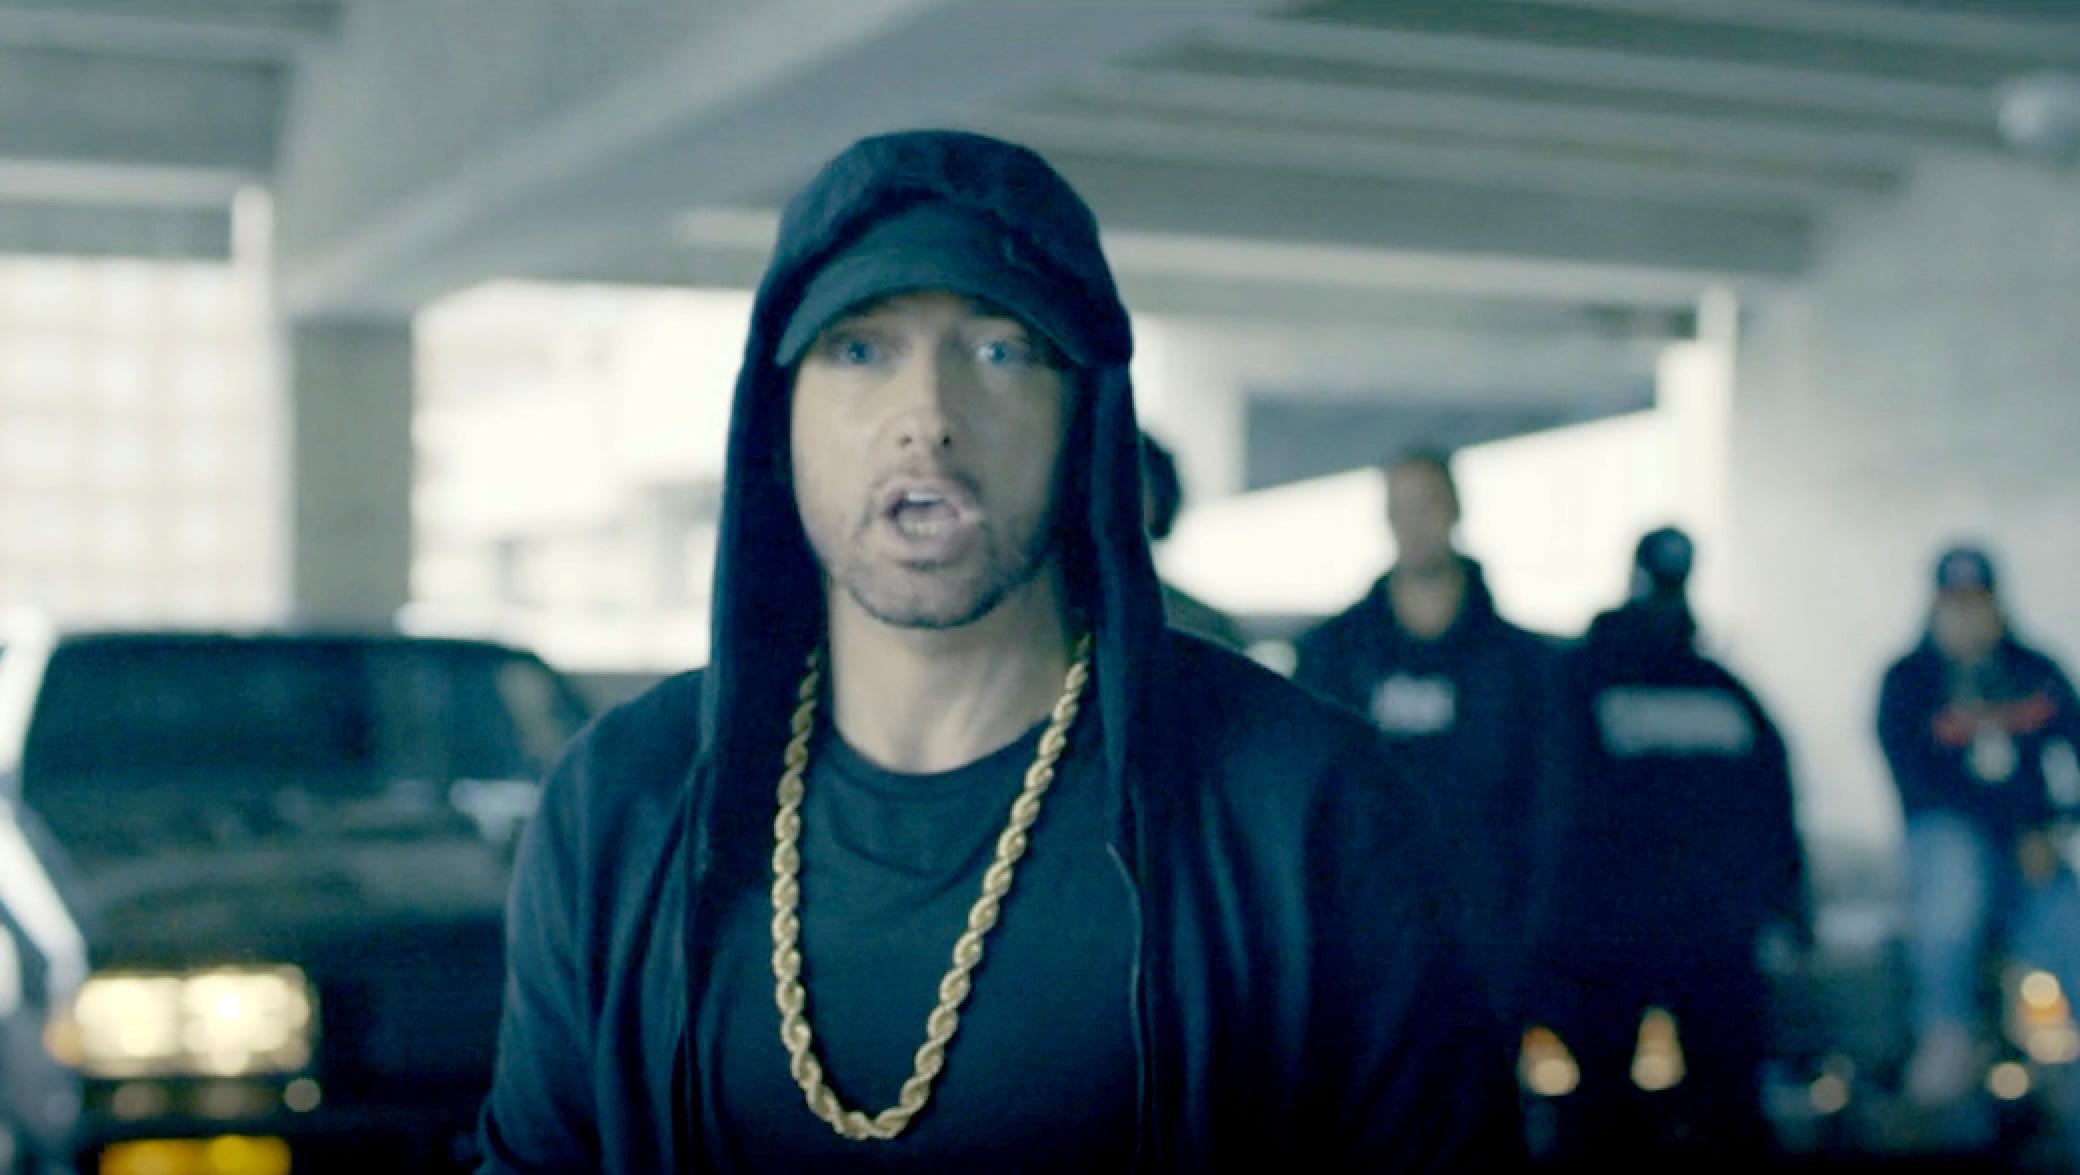 Eminem the No. spot with 'Revival'